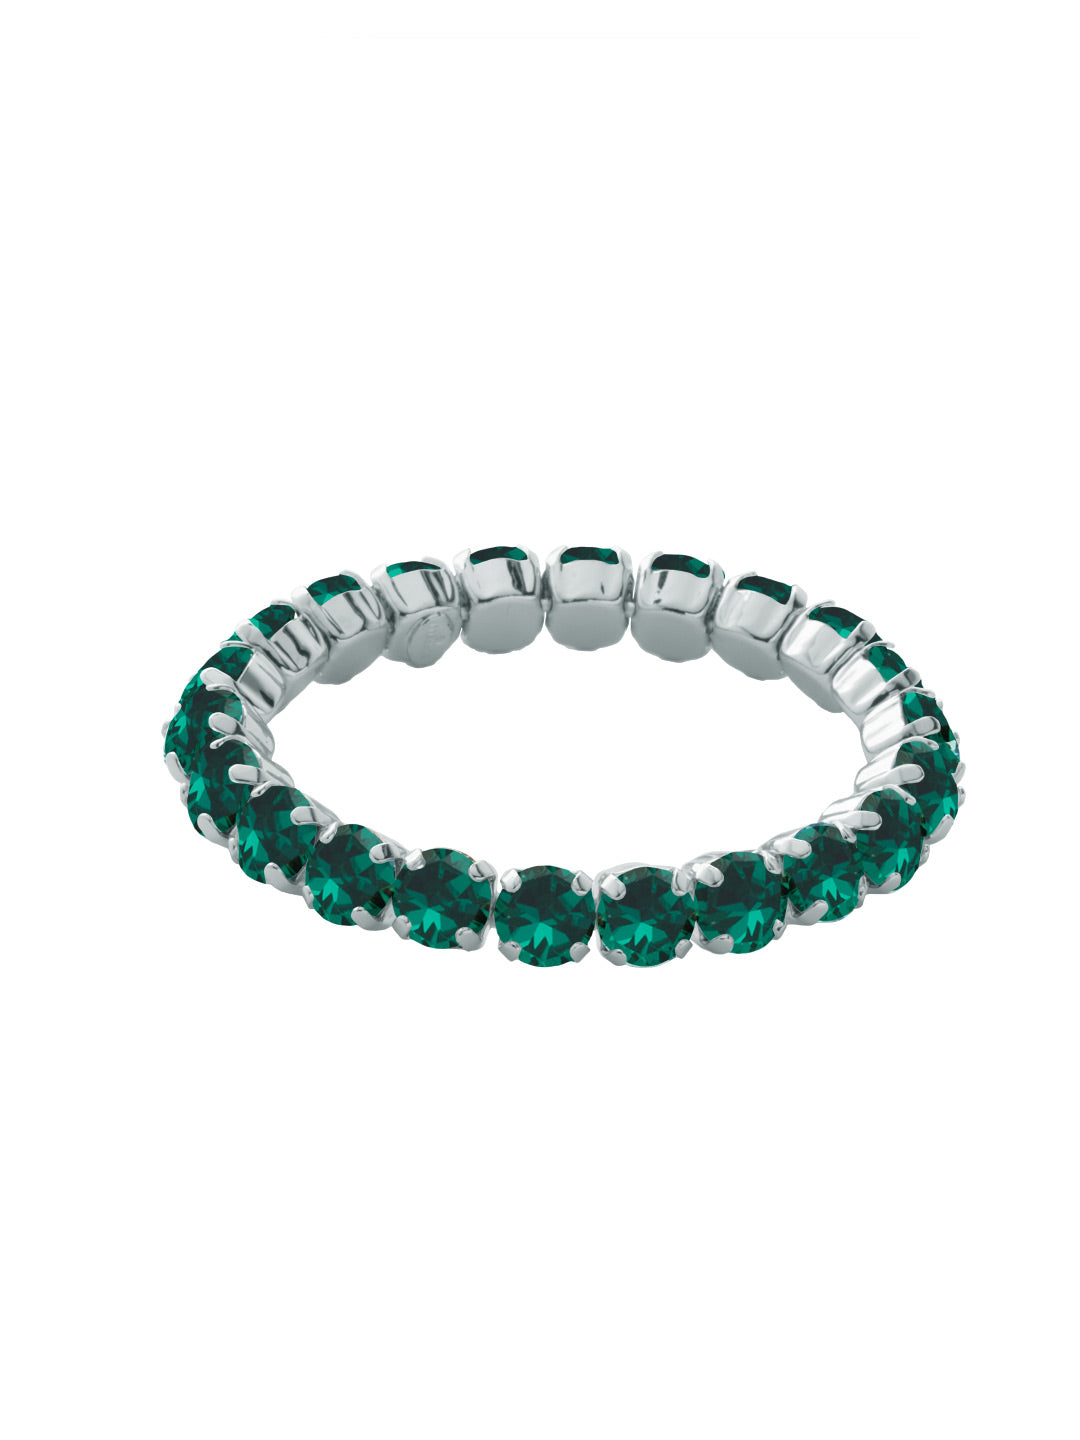 7 inch Sienna Stretch Bracelet - BFD50PDEME - <p>A modern take on a classic style, the Sienna Stretch Bracelet features a line of crystals on a sturdy jewelers' filament, stretching to fit most wrists comfortably, without the hassle of a clasp! (7 inches in diameter, fits average wrist sizes) From Sorrelli's Emerald collection in our Palladium finish.</p>